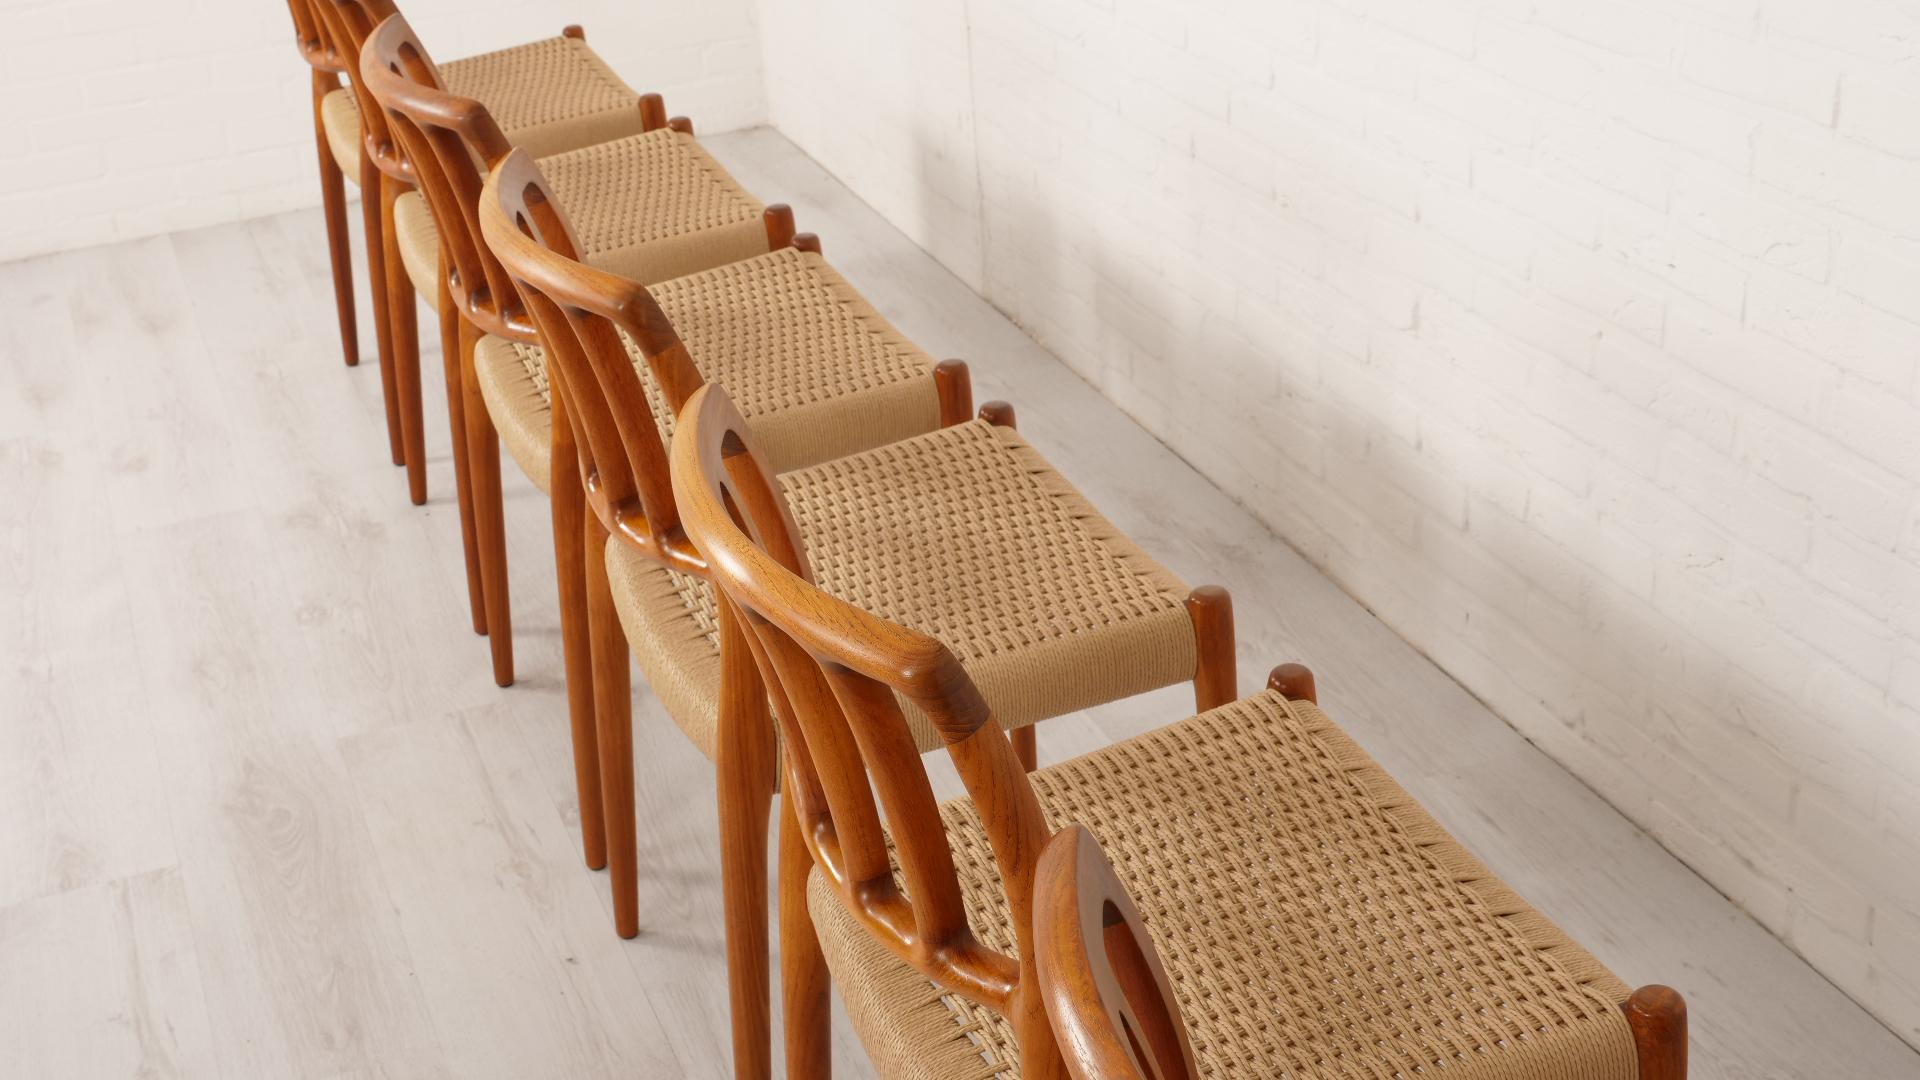 6 x Niels Otto Møller dining chairs  Model 83  Papercord  Teak  Restored For Sale 9